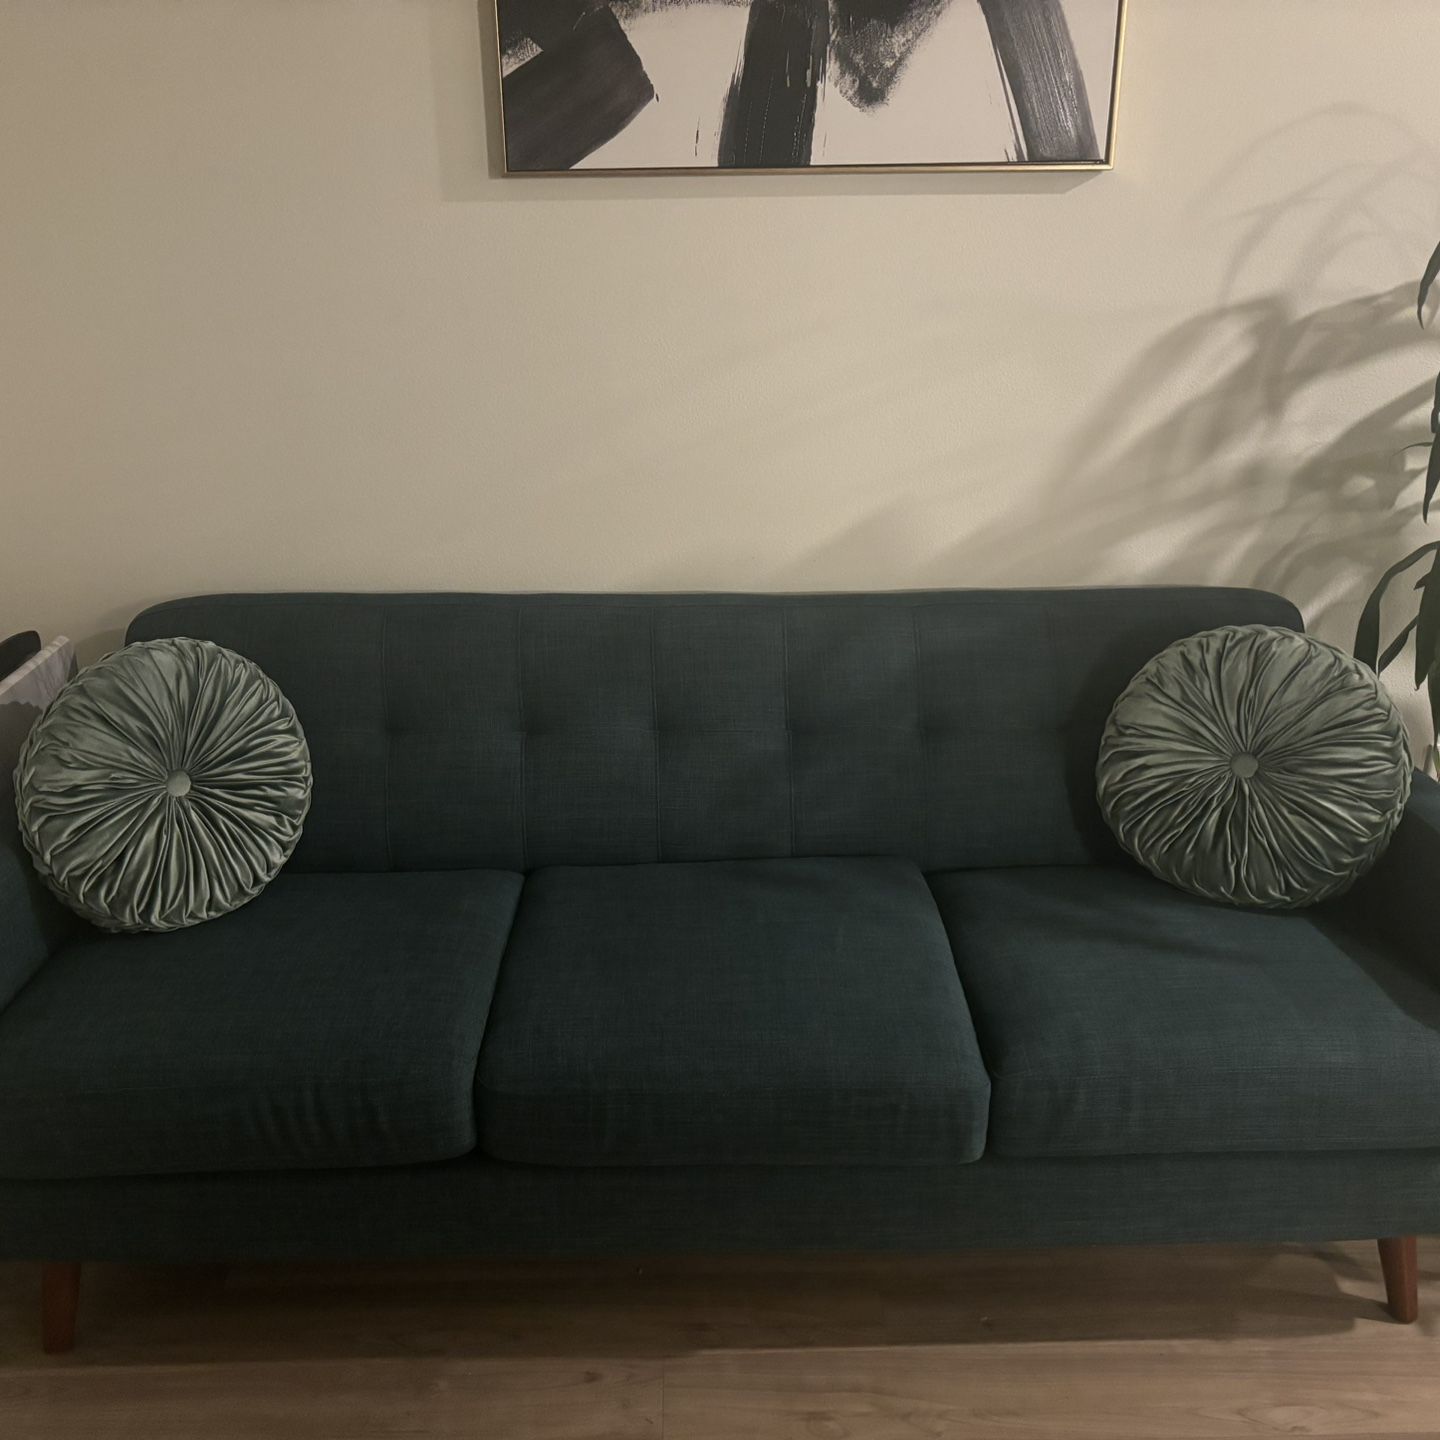 Excellent Condition Turquoise Sofa -$200